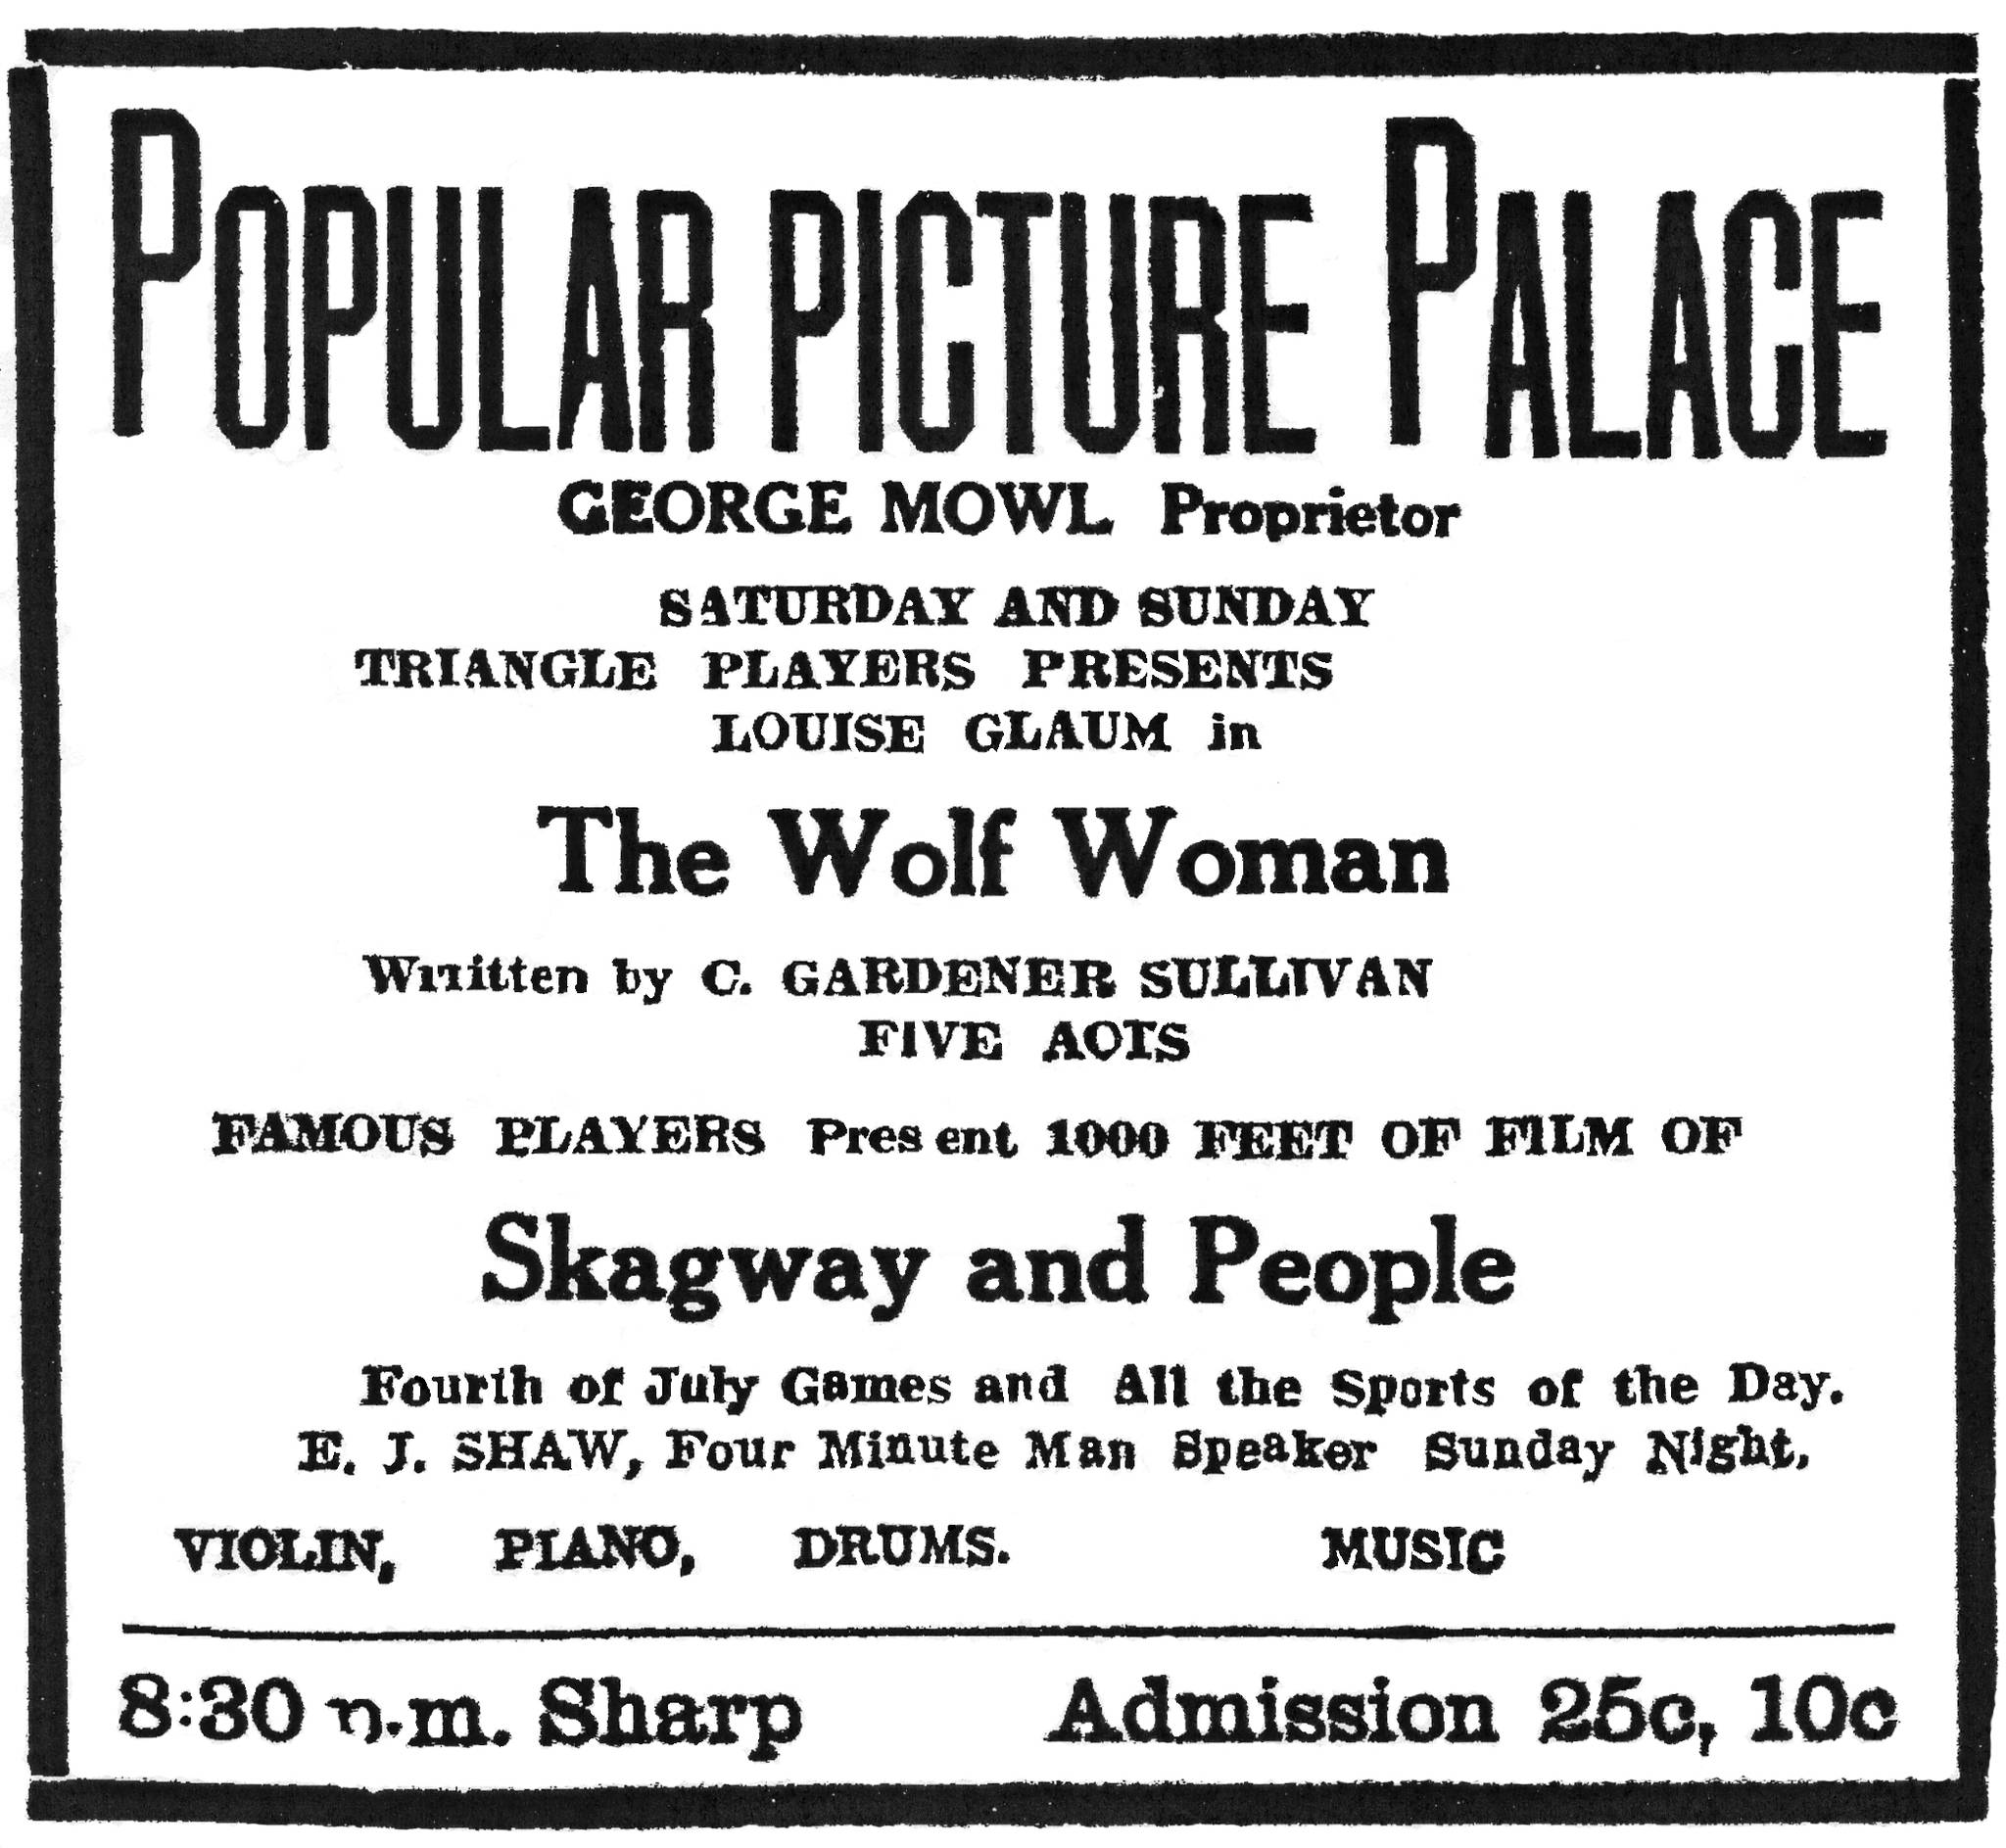 The Popular Picture Palace advertisement of “A Day in Skagway.” This is the first advertisement in the Daily Alaskan for the “World Premier Showing” of “A Day in Skagway.” Here the film is called “Skagway and People” and it’s said to be 1,000 feet of film. The current version of the film is less than half that length. The main feature, “The Wolf Woman” was produced in 1916. Photo from the Daily Alaskan, Sept. 6 1918, page 1, columns 1-2.